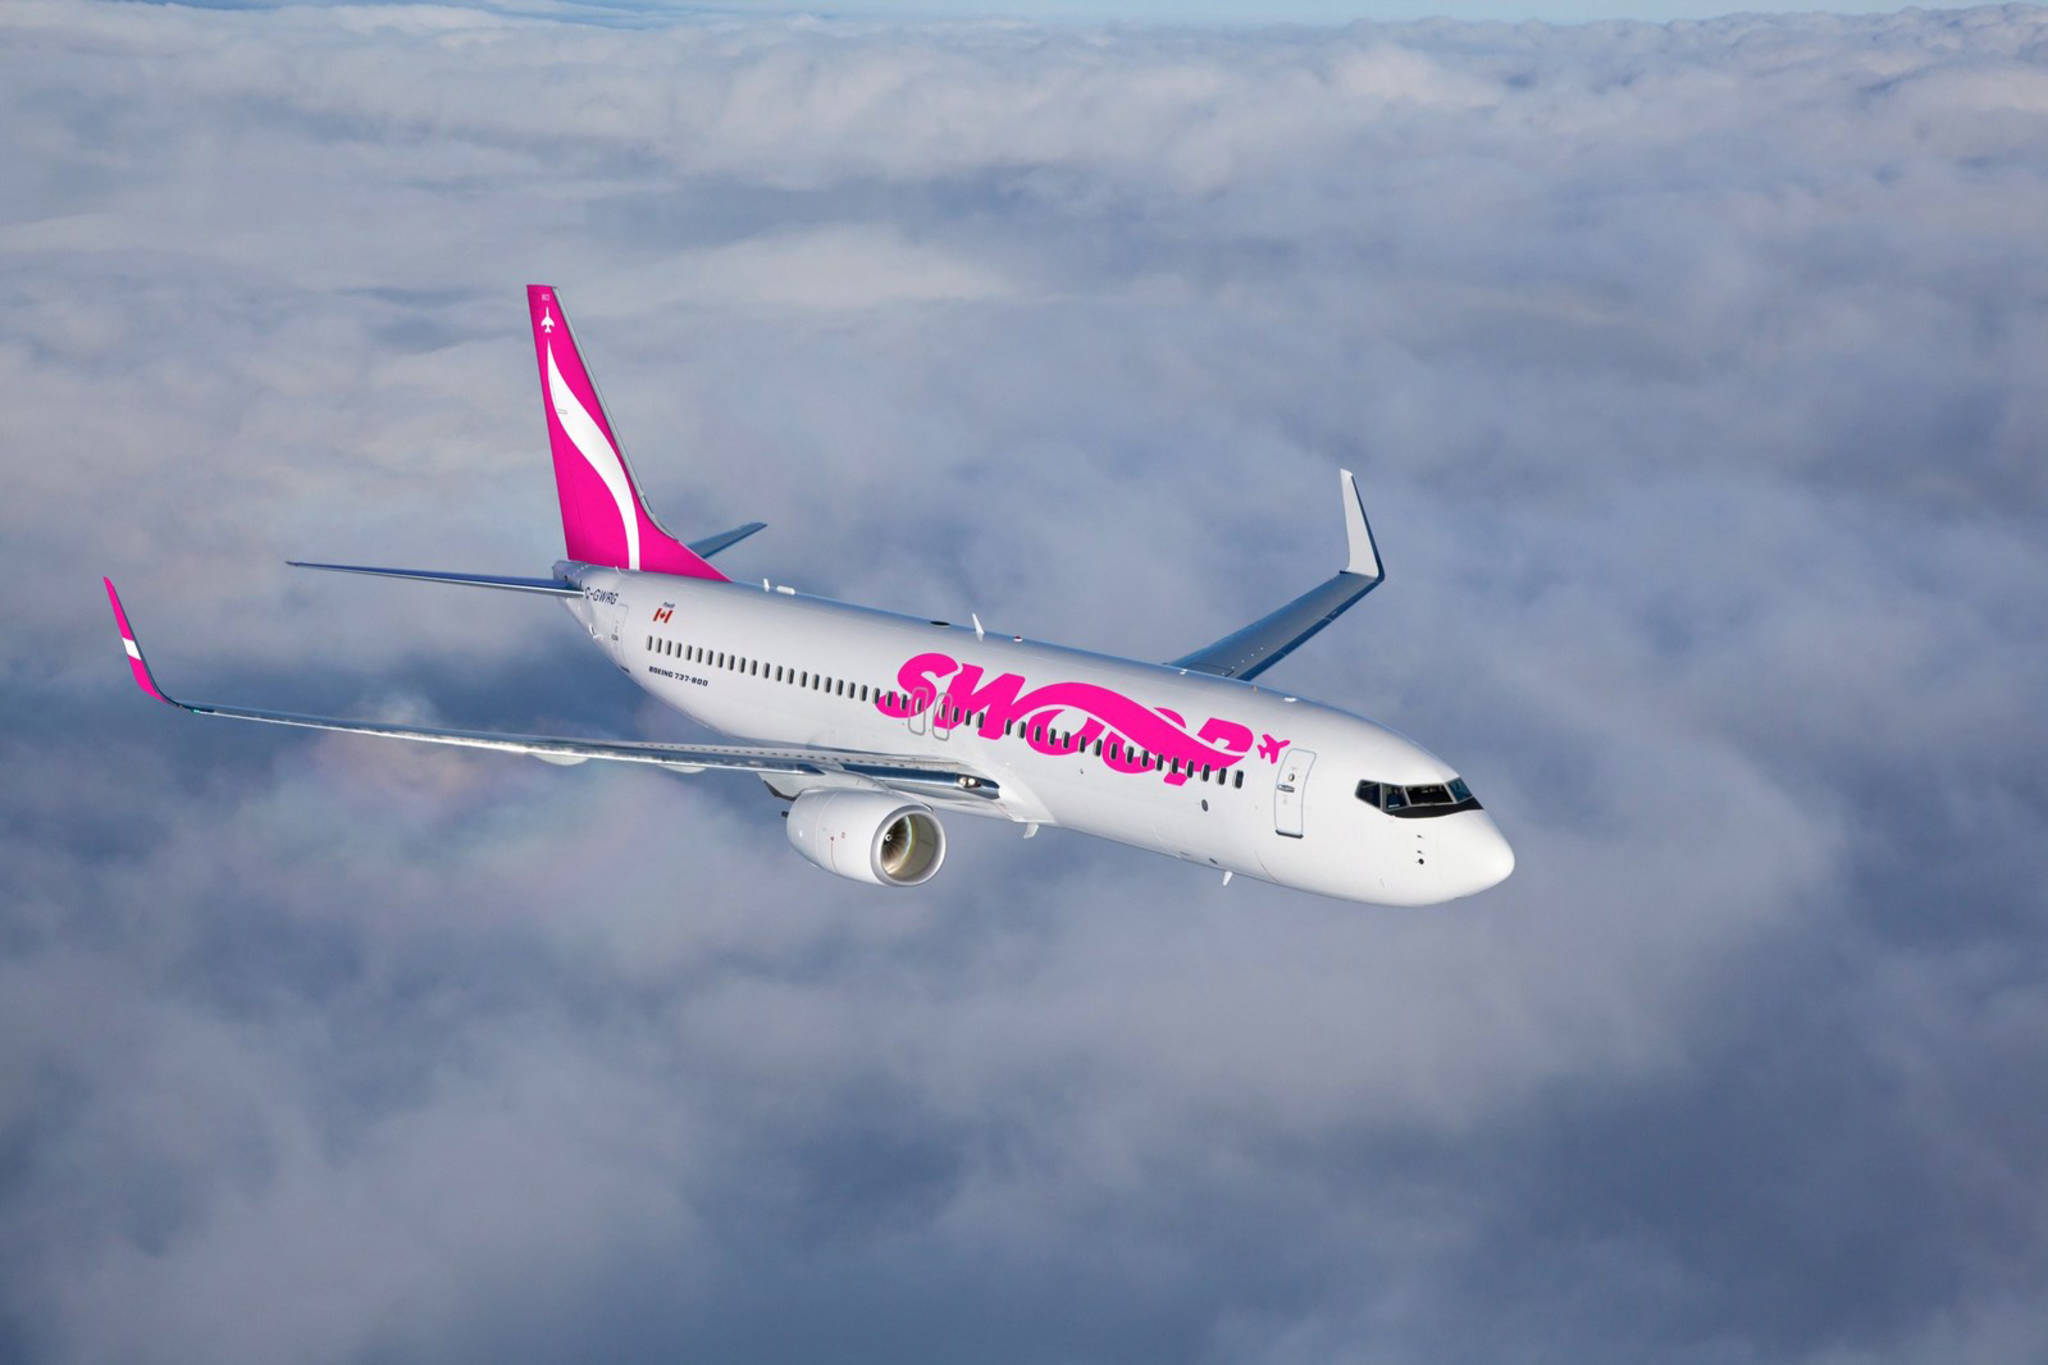 WestJet's new discount airline launches with ridiculously